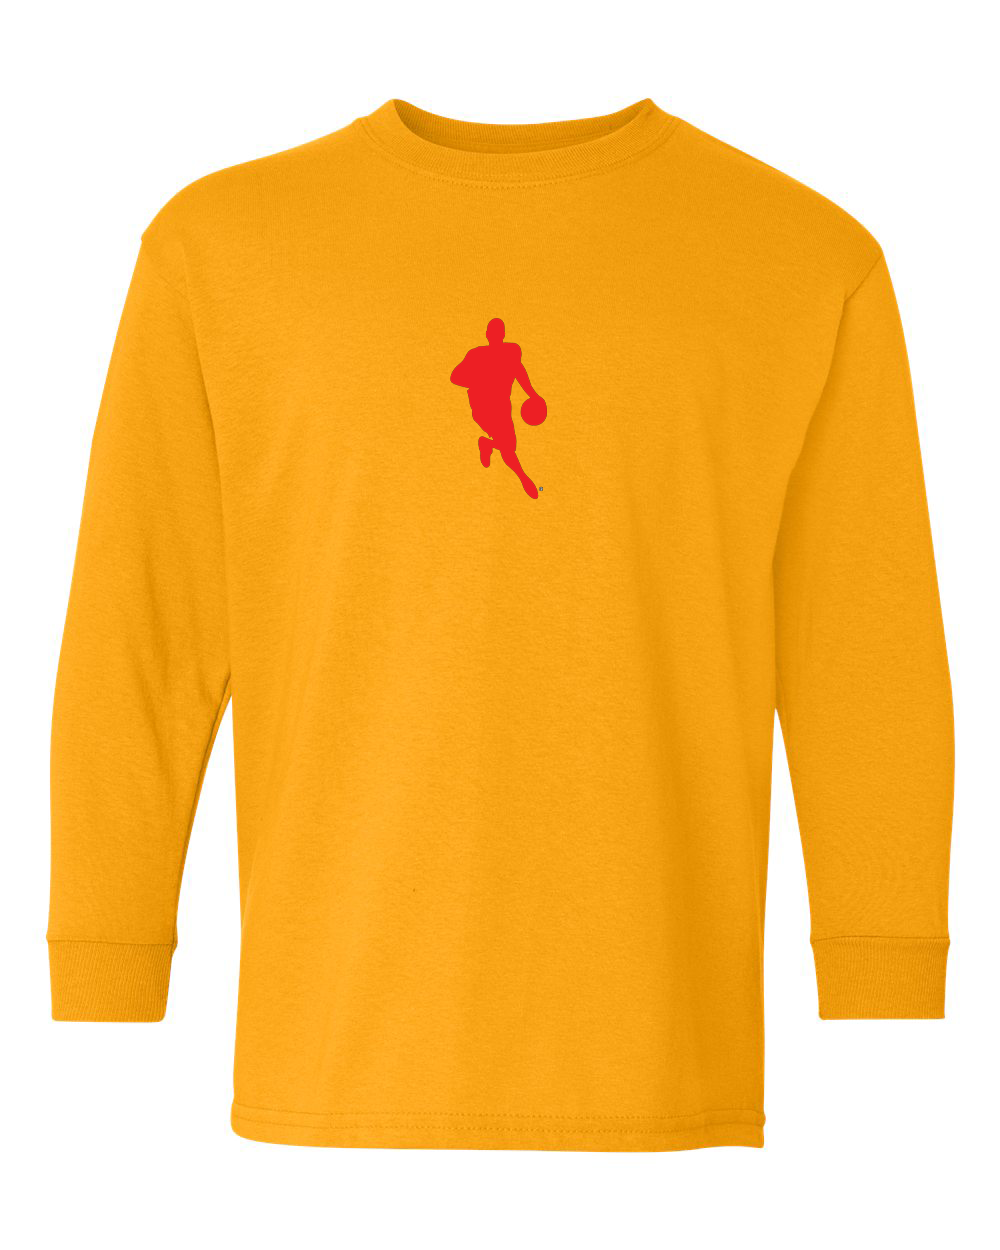 GOLD W.L.A.B. RED YOUTH LONG SLEEVE T-SHIRT